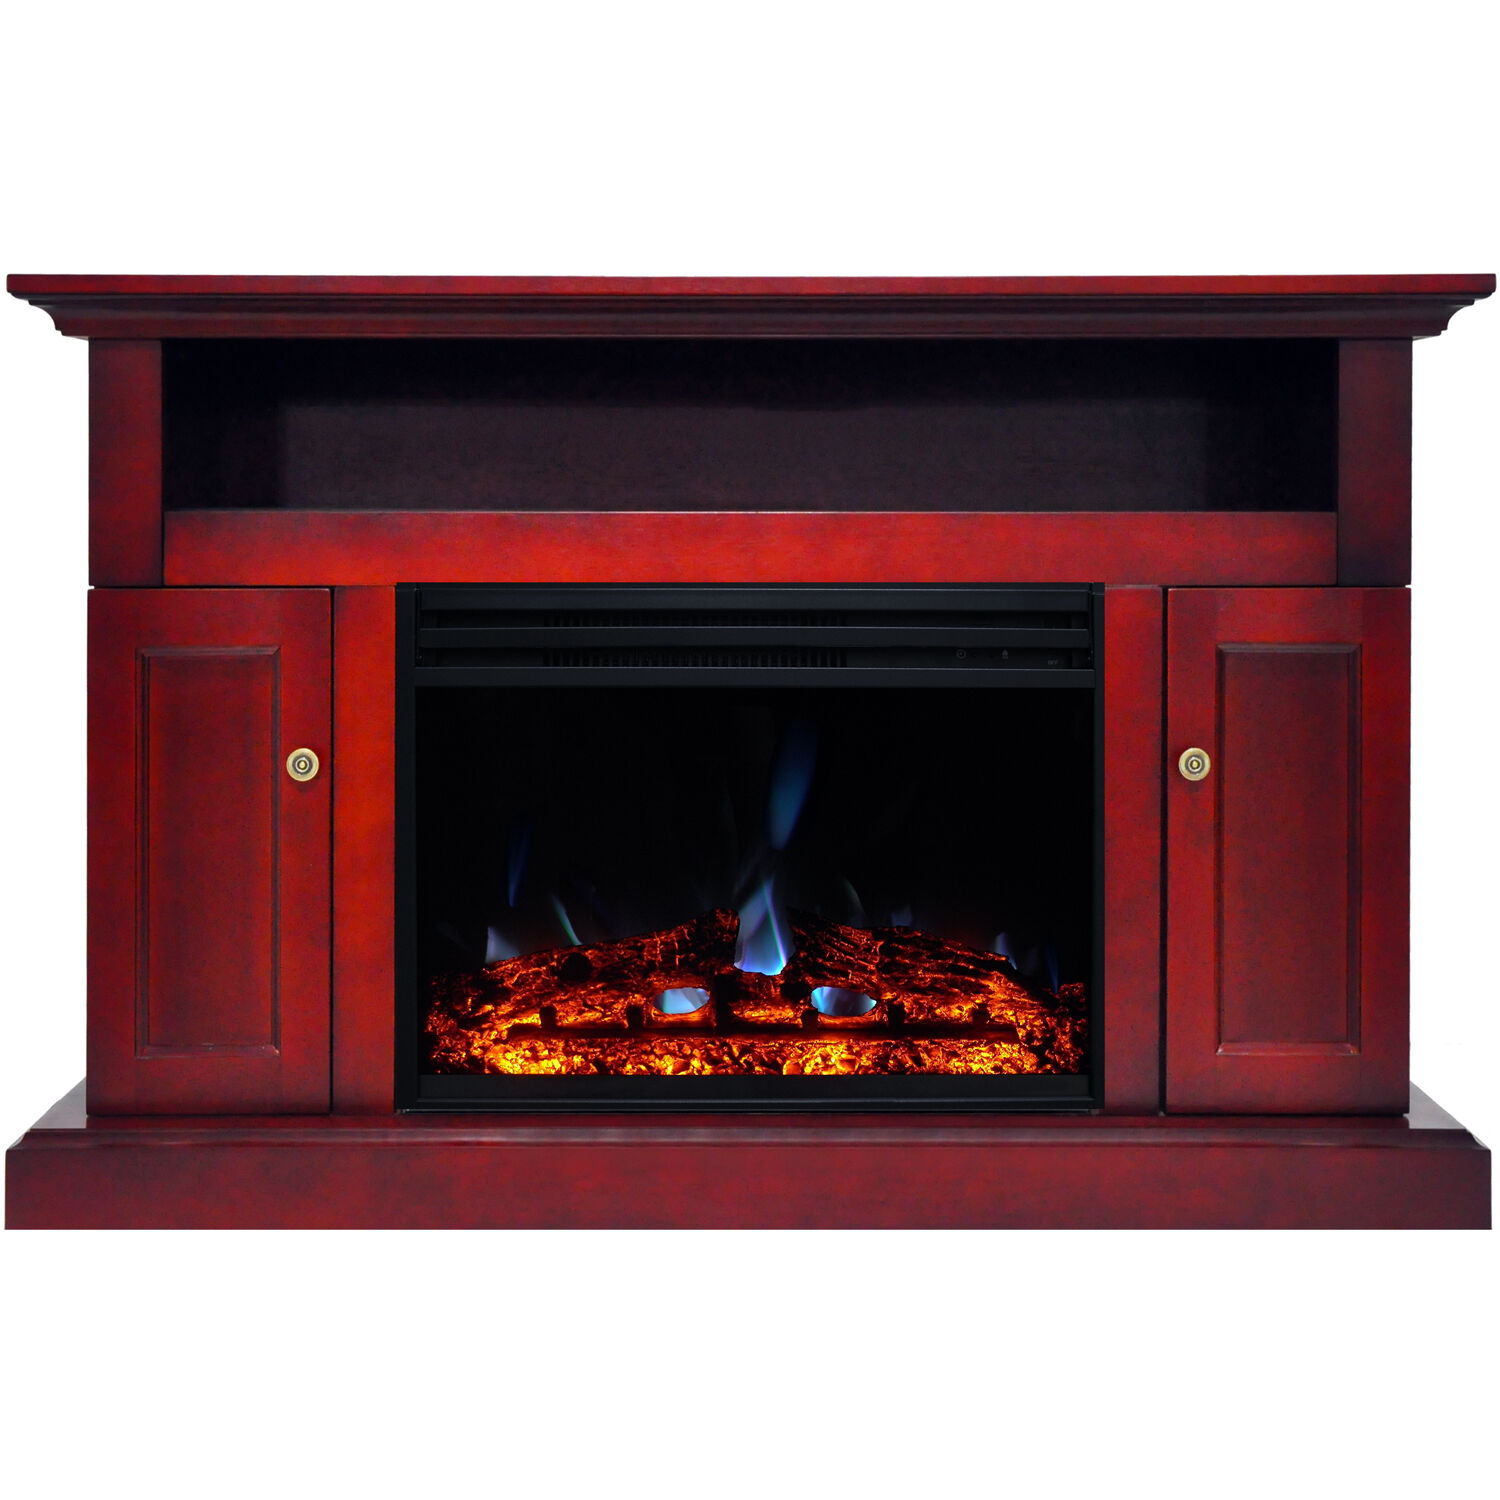 Hanover Kingsford Electric Fireplace Heater with Deep Log Display, Multi-color Flames and 47-In. Entertainment Stand in Cherry - image 5 of 10